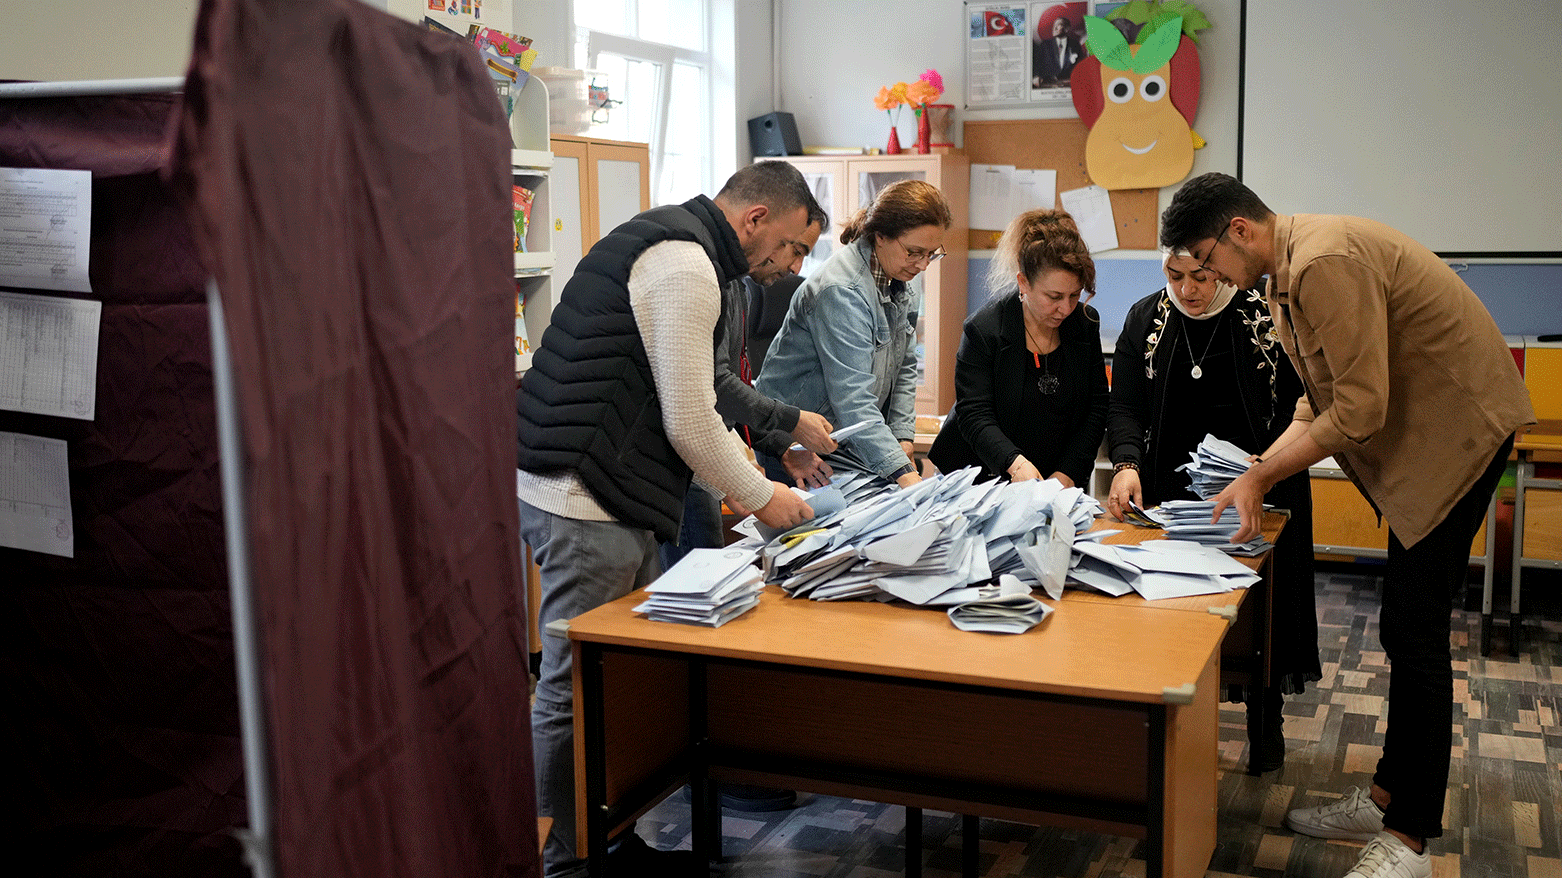 Turkeys opposition appears set to retain key cities preliminary local election results show